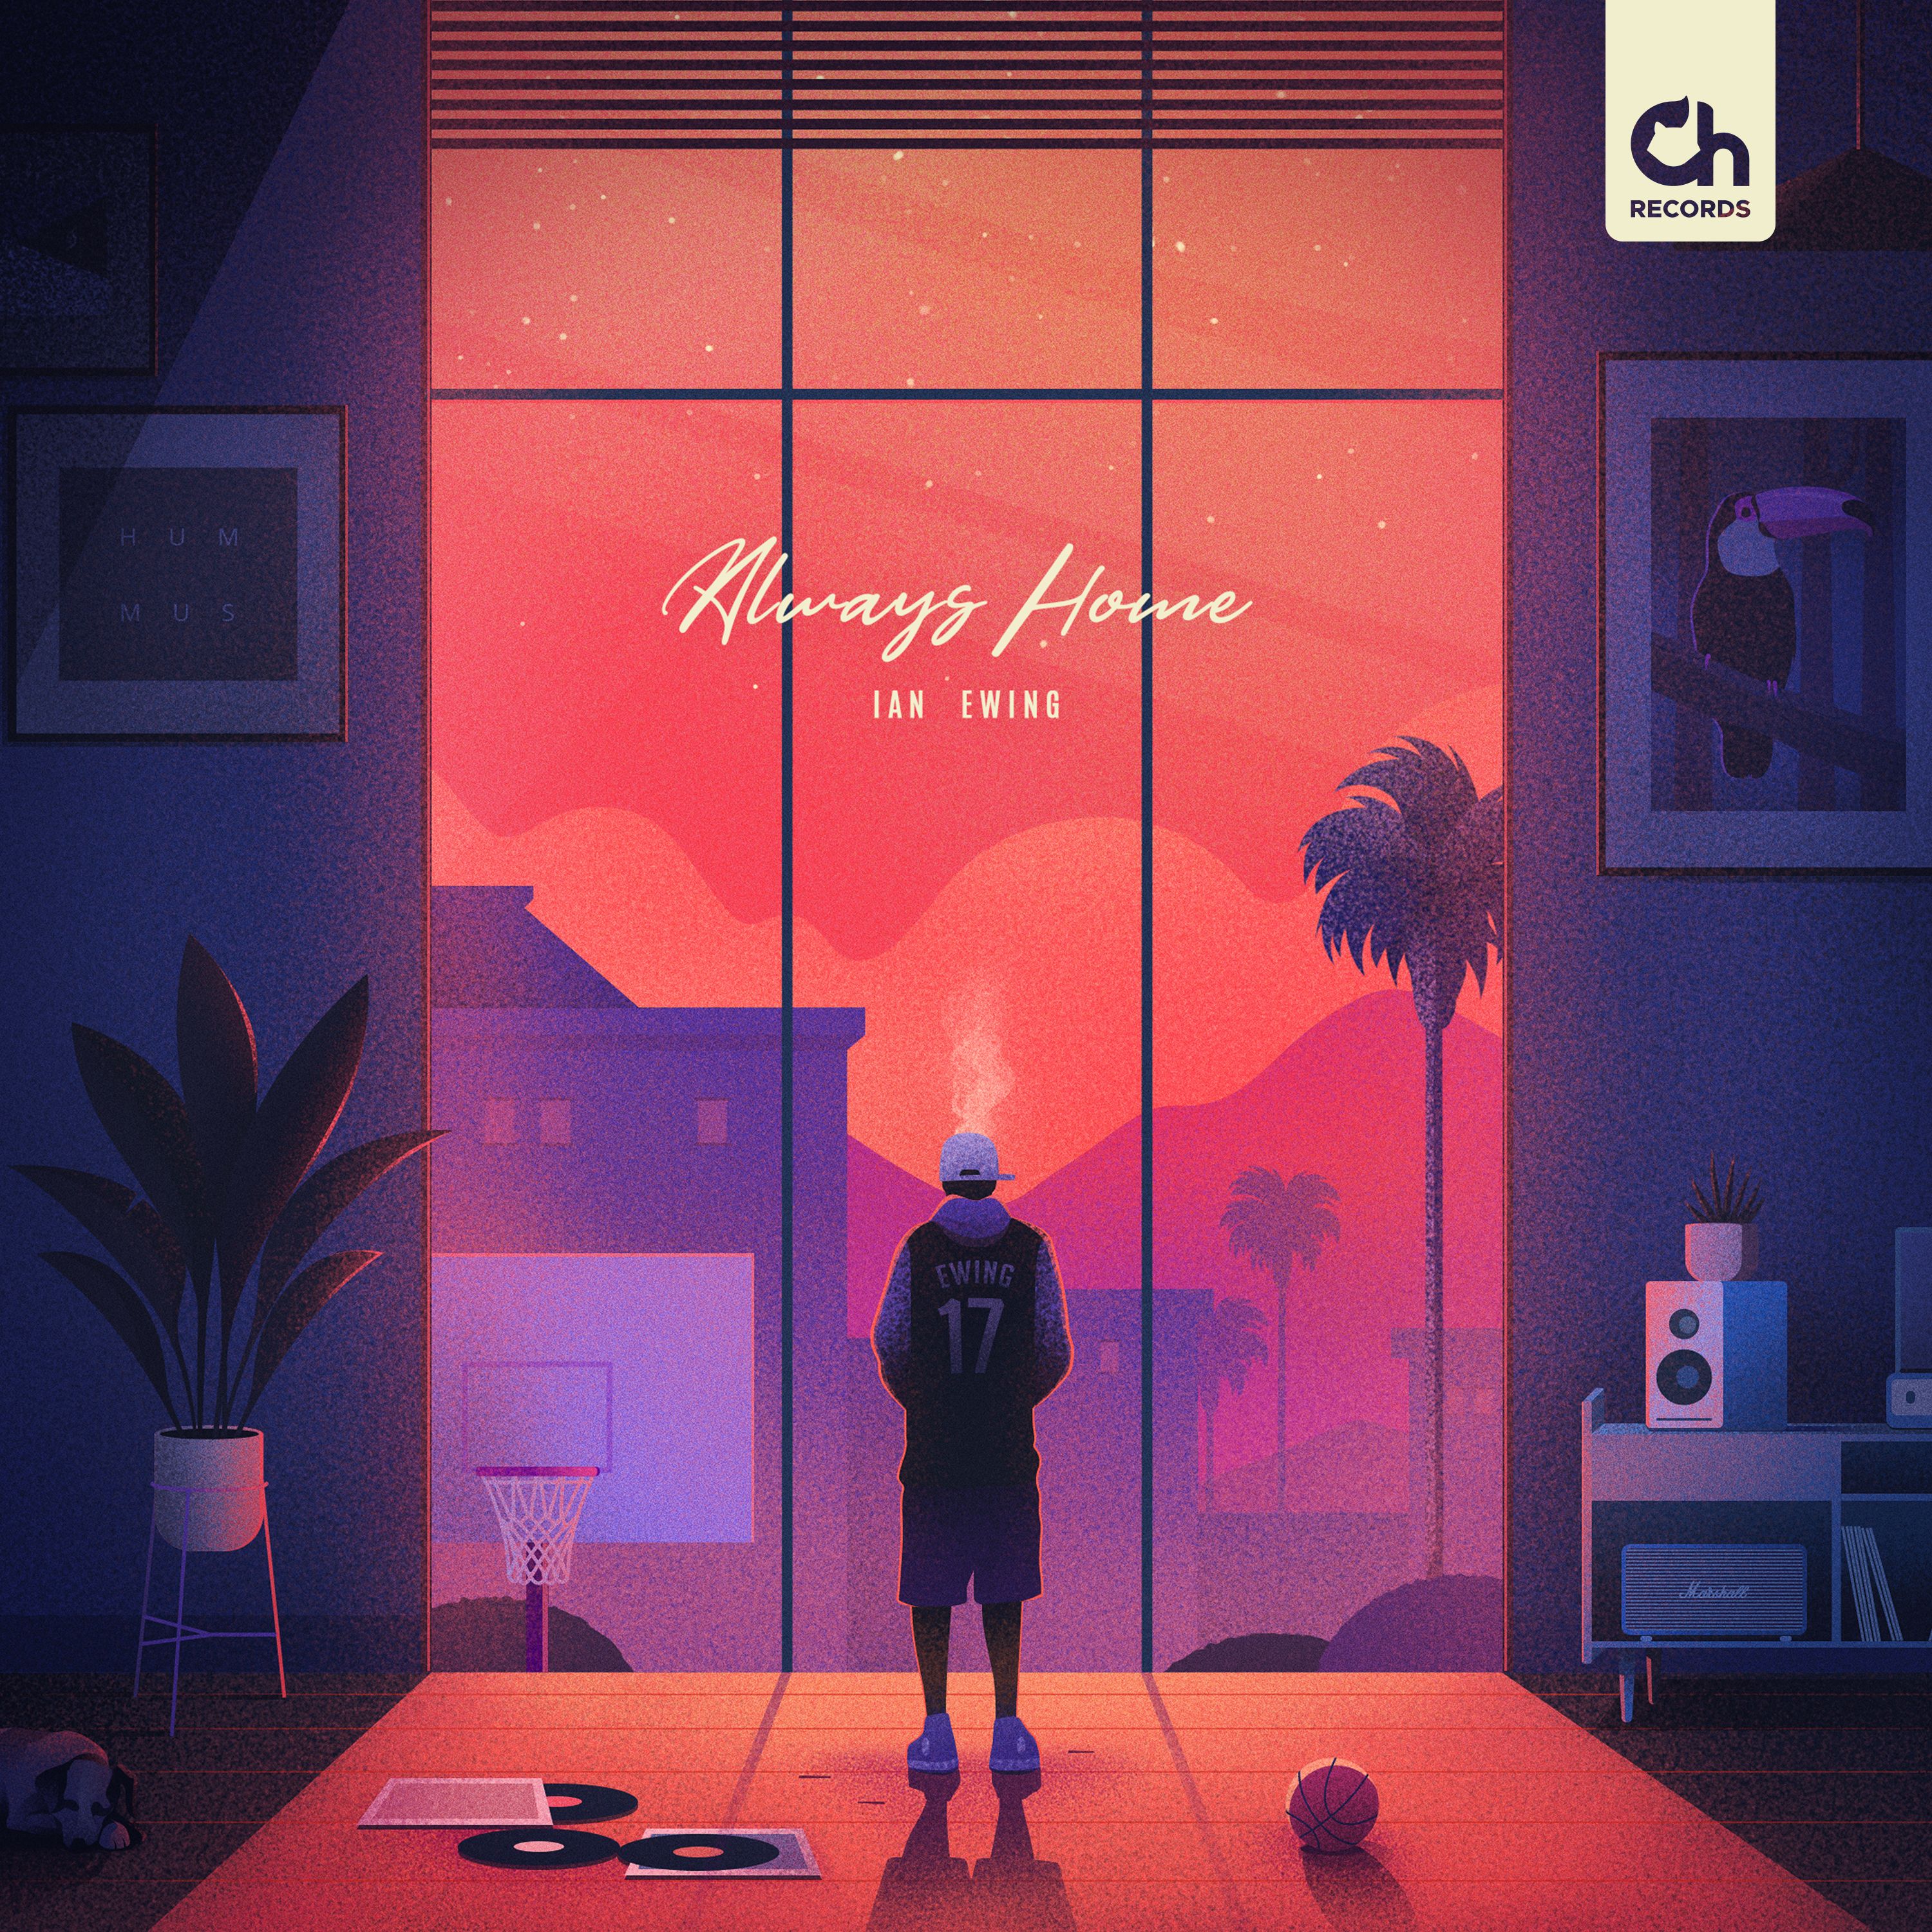 Sii mai Ian Ewing - 17 ["Always Home" EP out on 09.09]